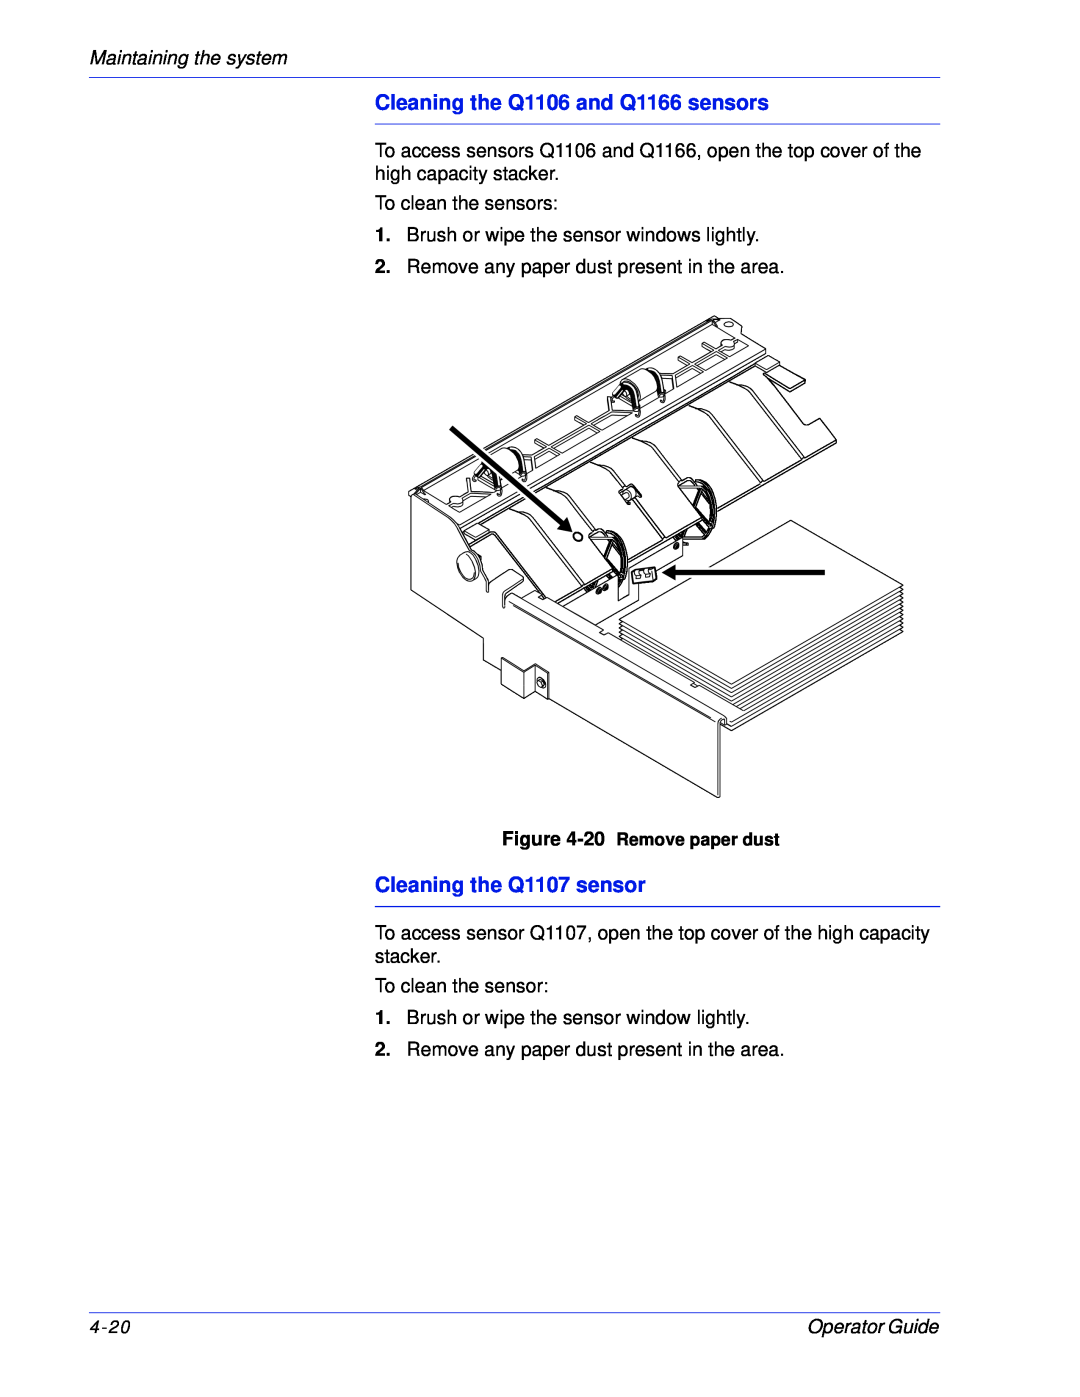 Xerox 100, 180 EPS manual Cleaning the Q1106 and Q1166 sensors, Cleaning the Q1107 sensor, Maintaining the system 